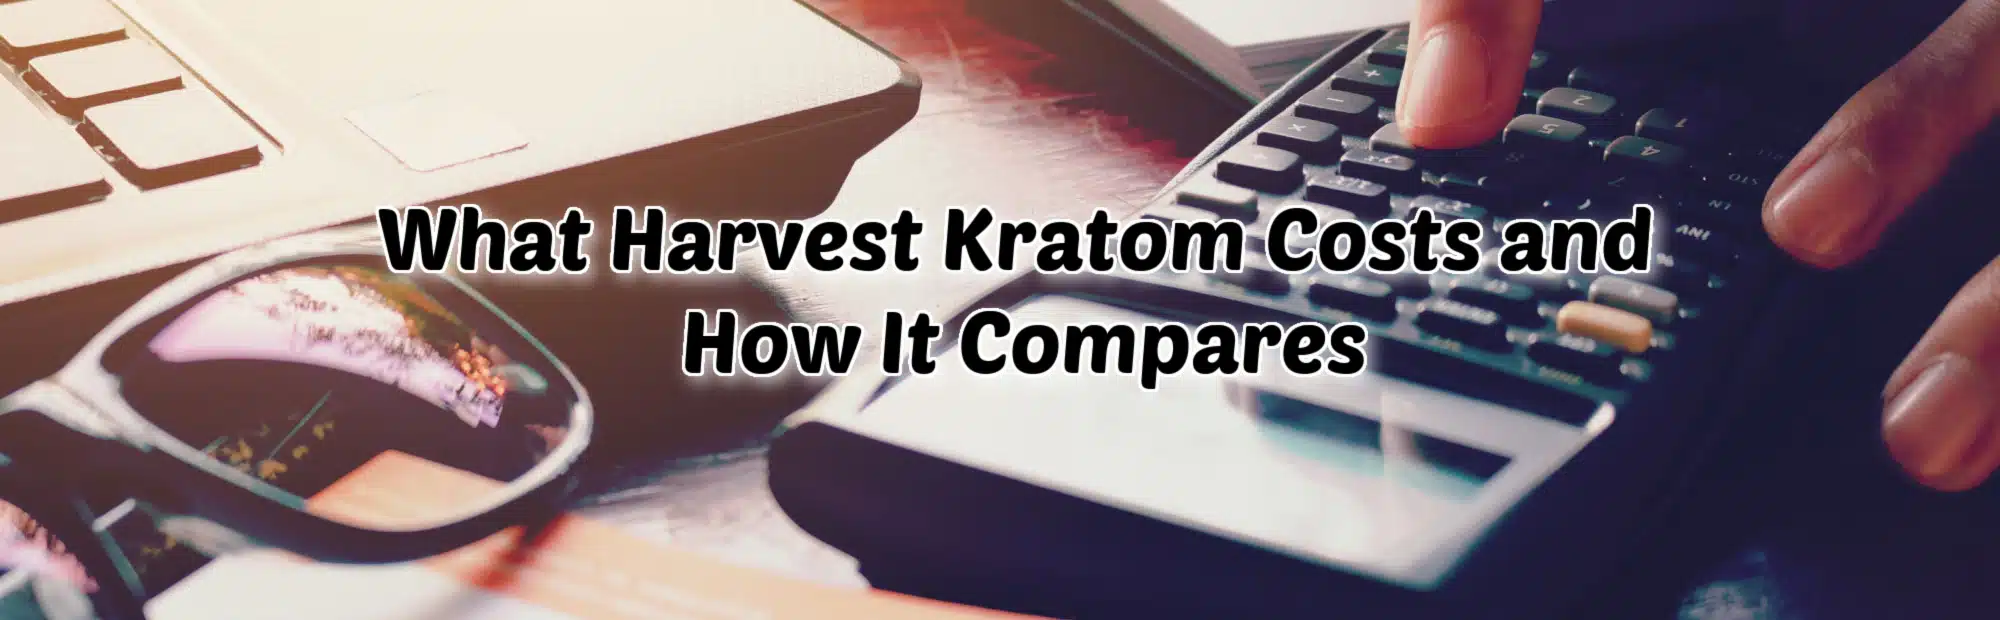 "What harvest kratom costs and how it compares" banner